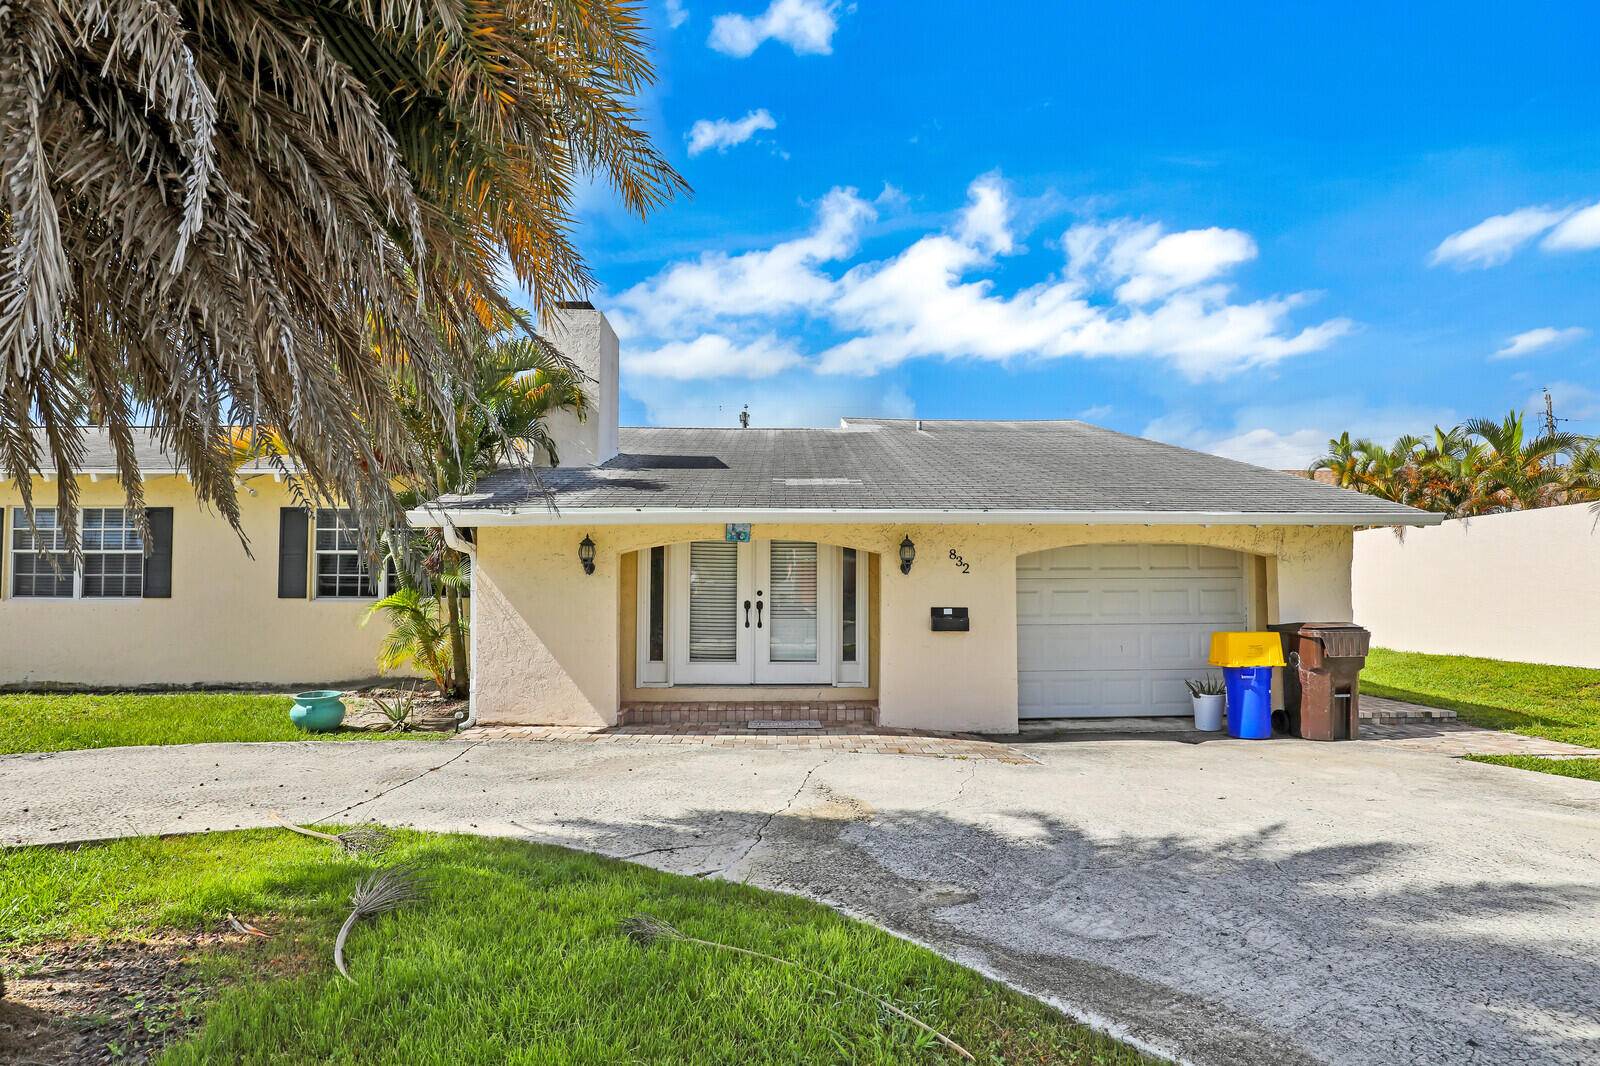 A unique opportunity this home comes with a spacious 3 bedroom 2 bathroom floor plan ; large screened porch and private balcony overlooking an in ground pool enclosed by a ...